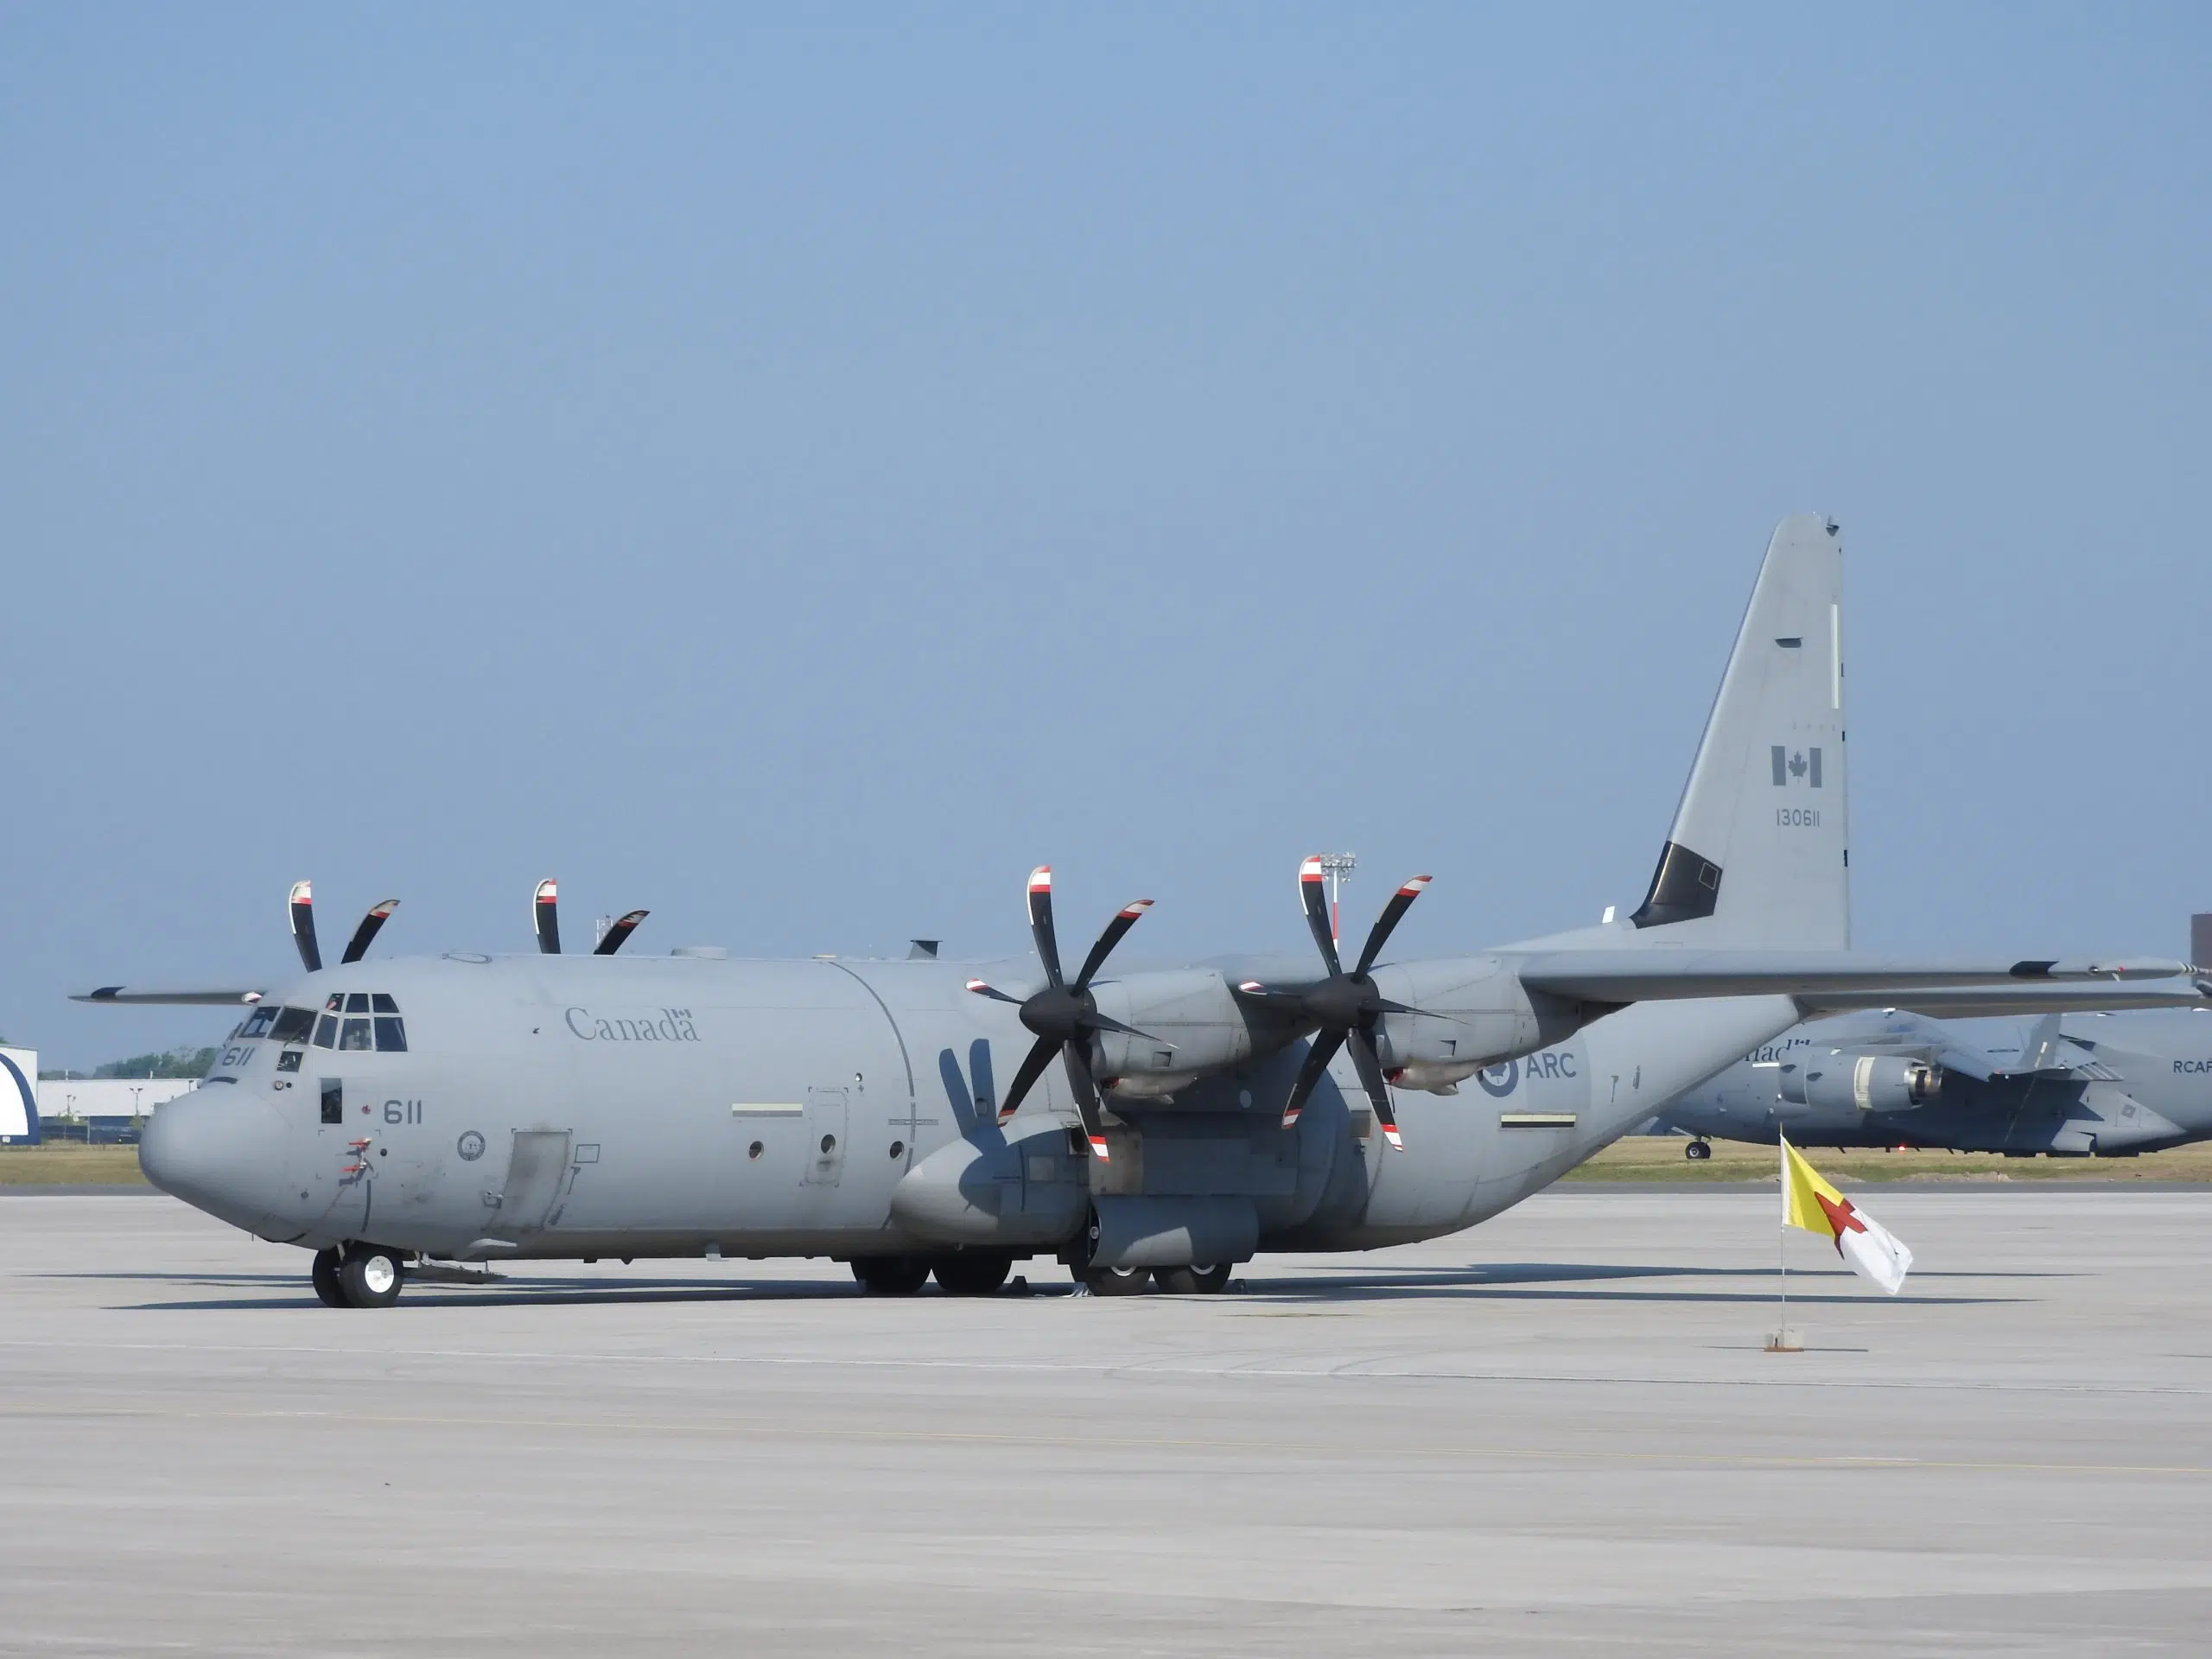 CFB Trenton aircraft continue search for missing plane